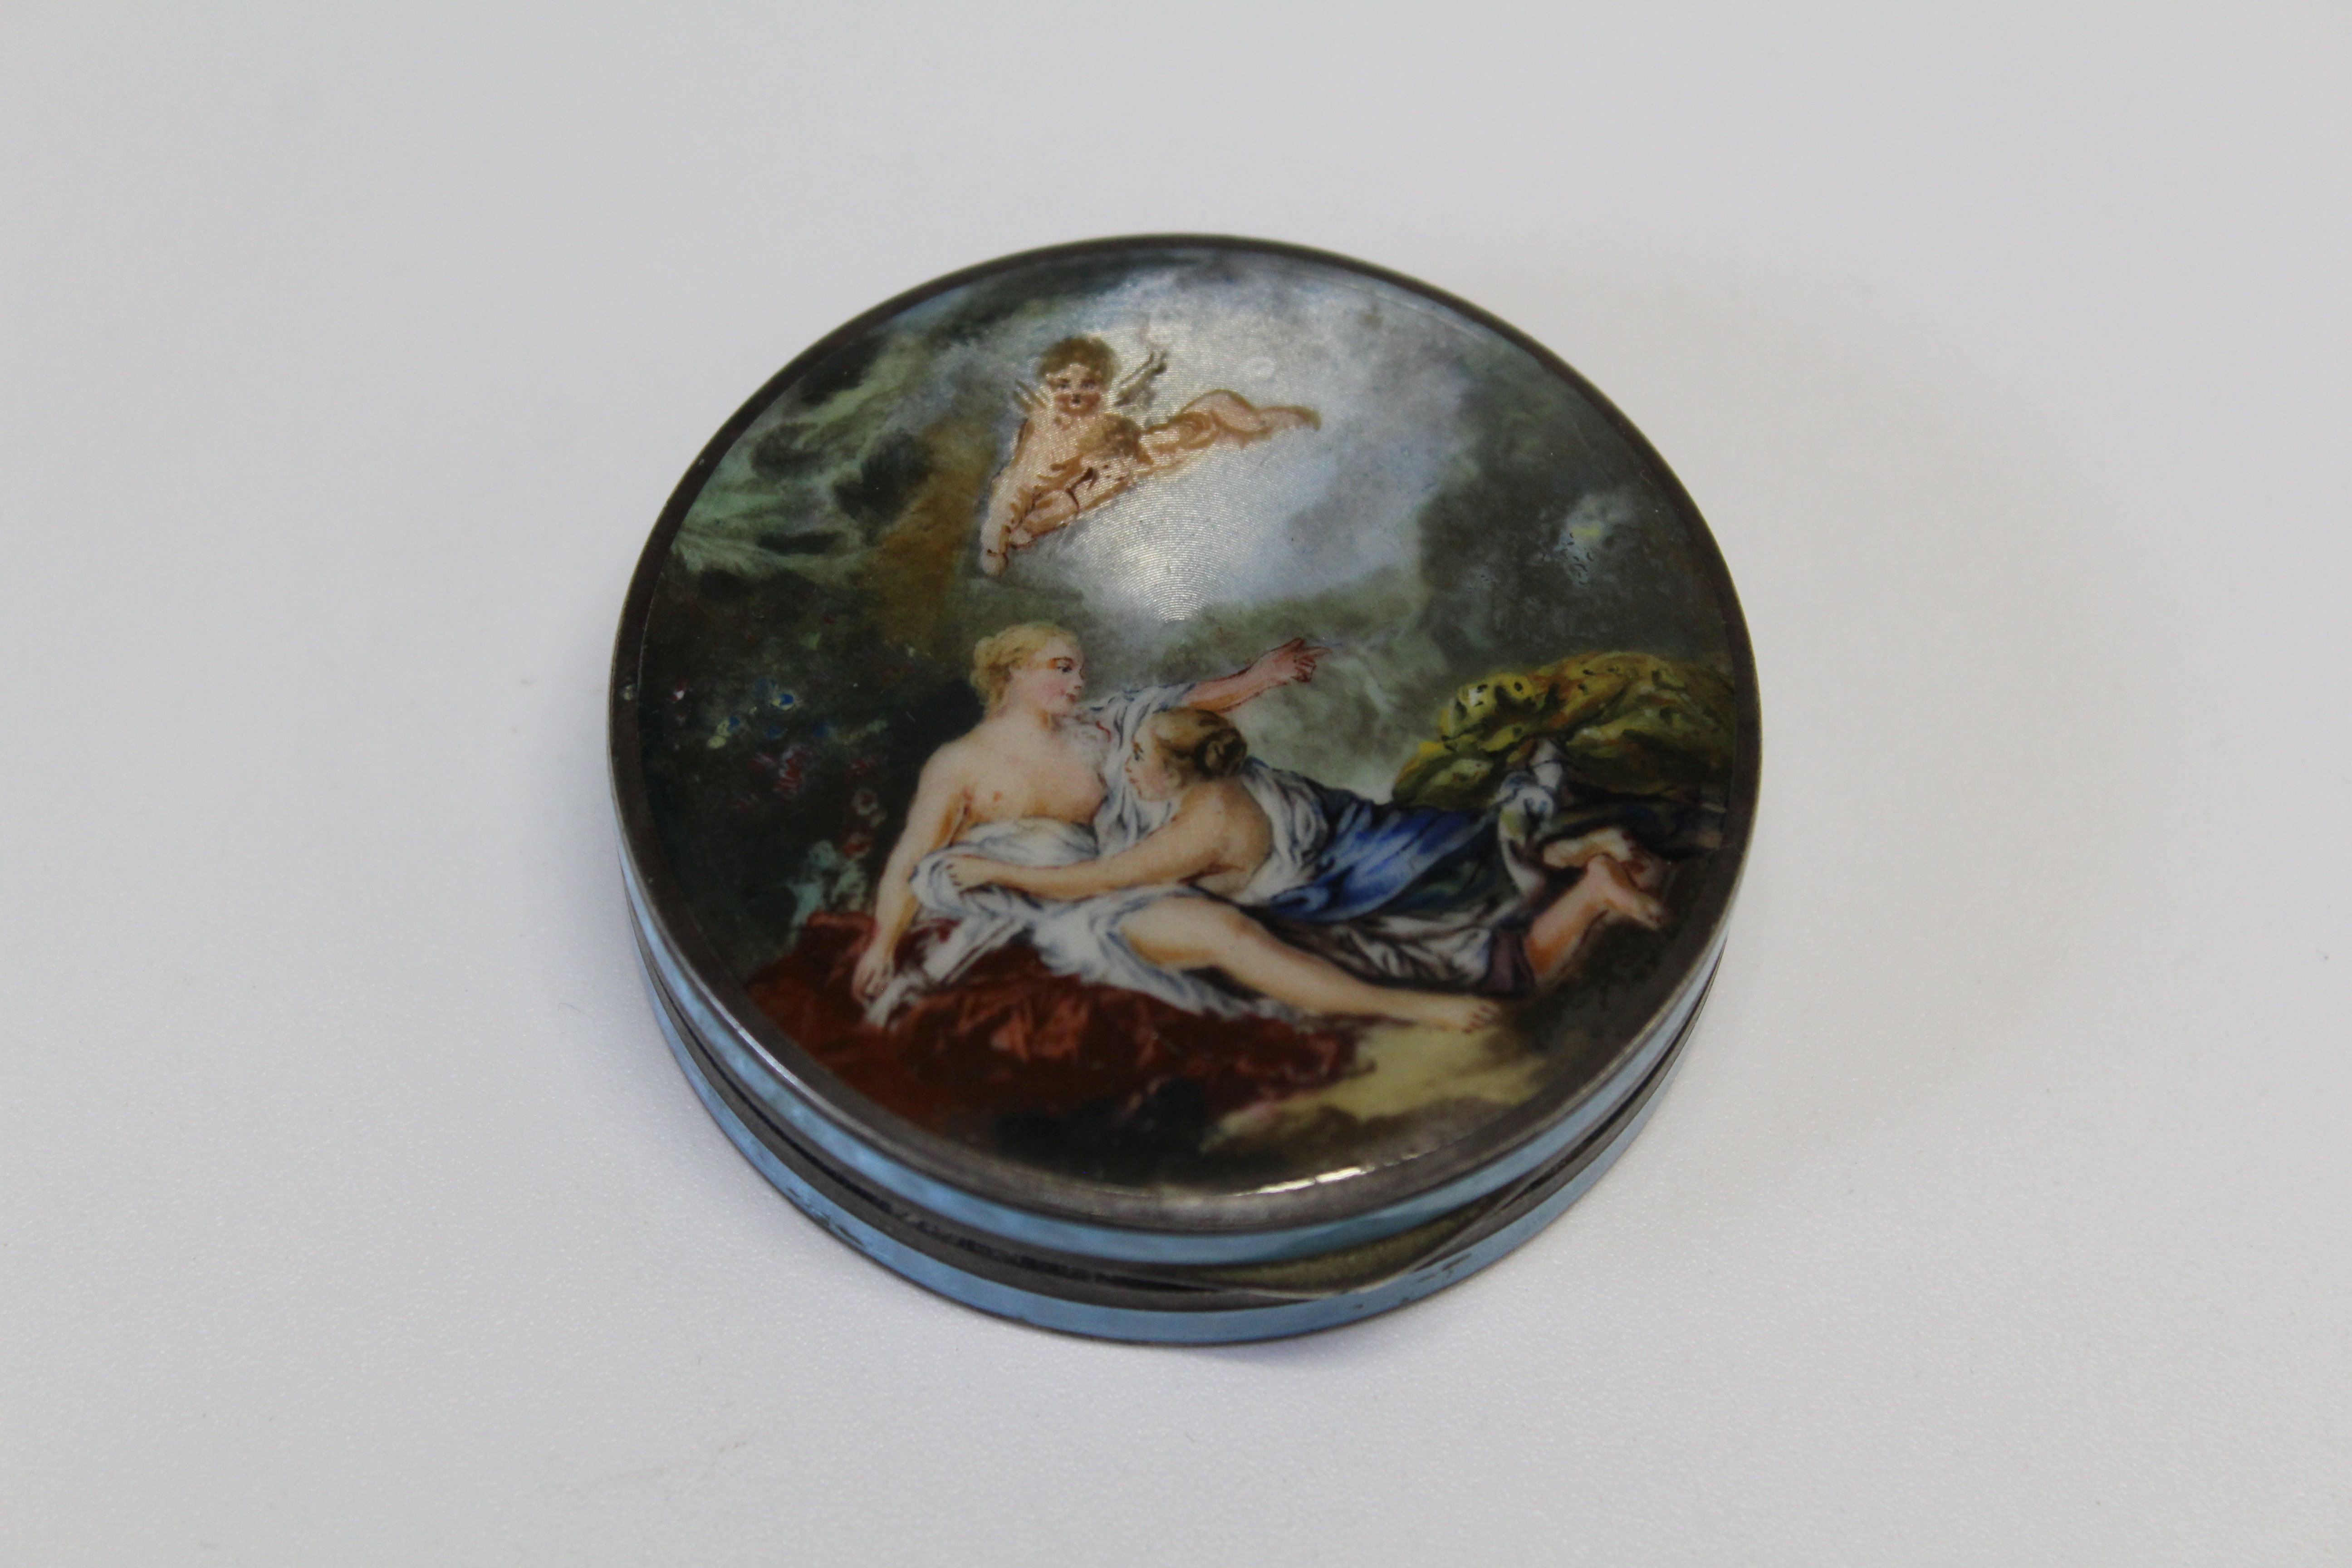 A circa 1920's silver gilt and enamel compact of disc shape. The hinged cover decorated with an